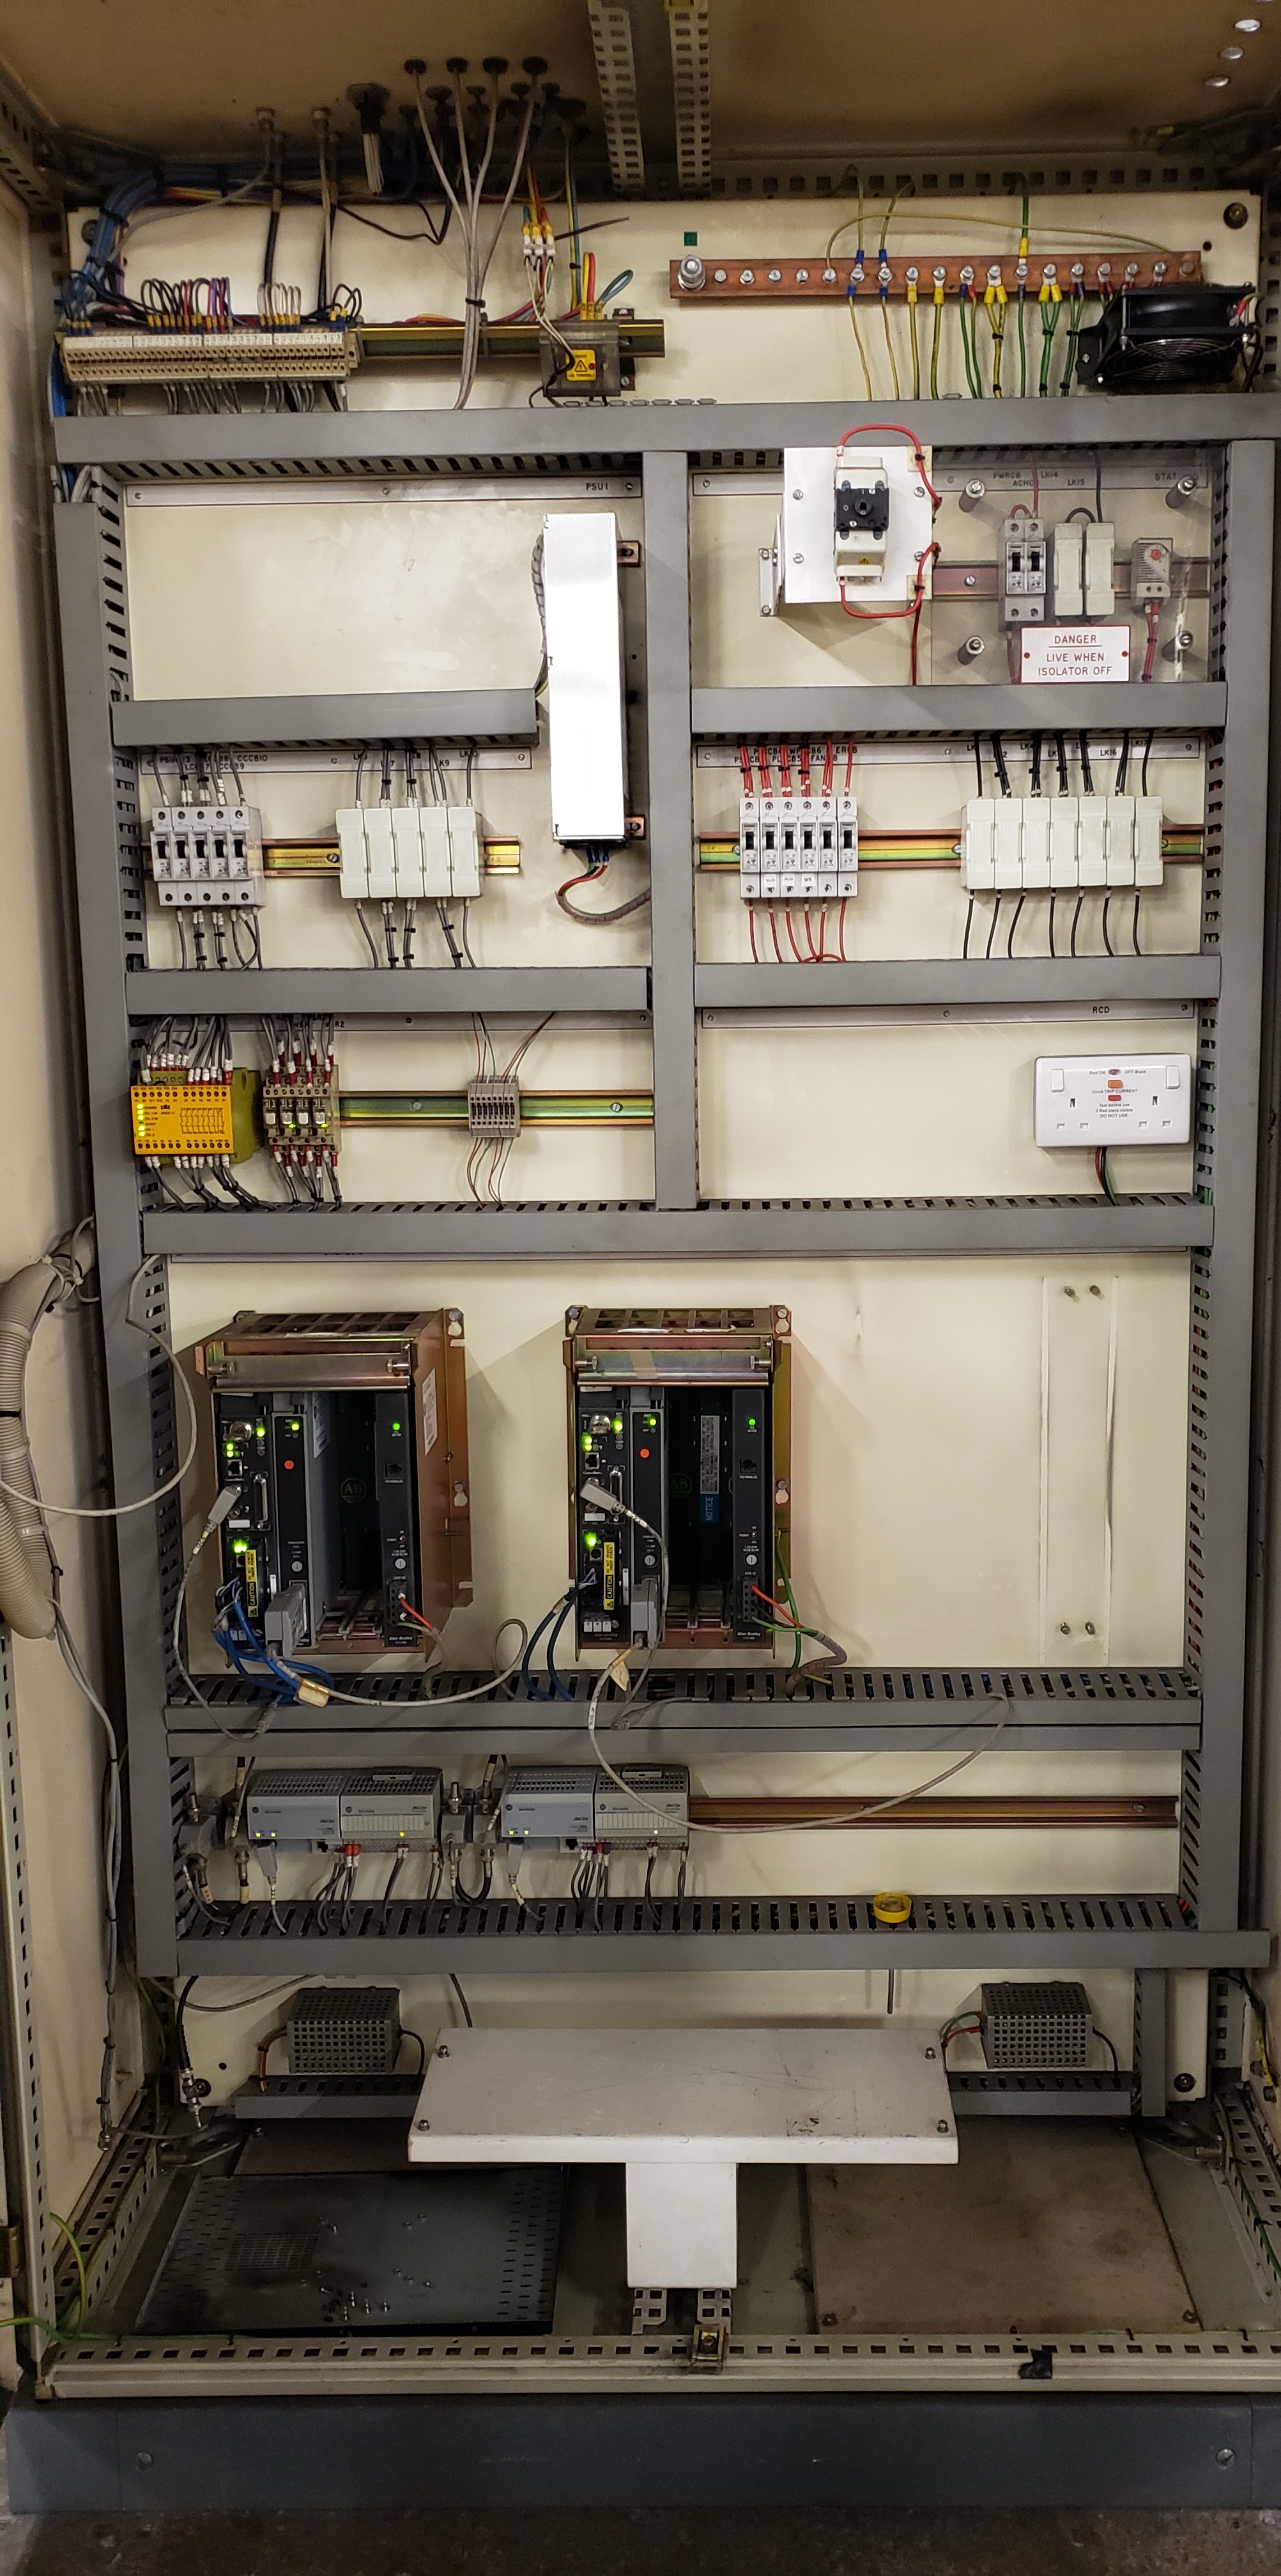 Internal View of CHEPLC PLC Panel Before Works